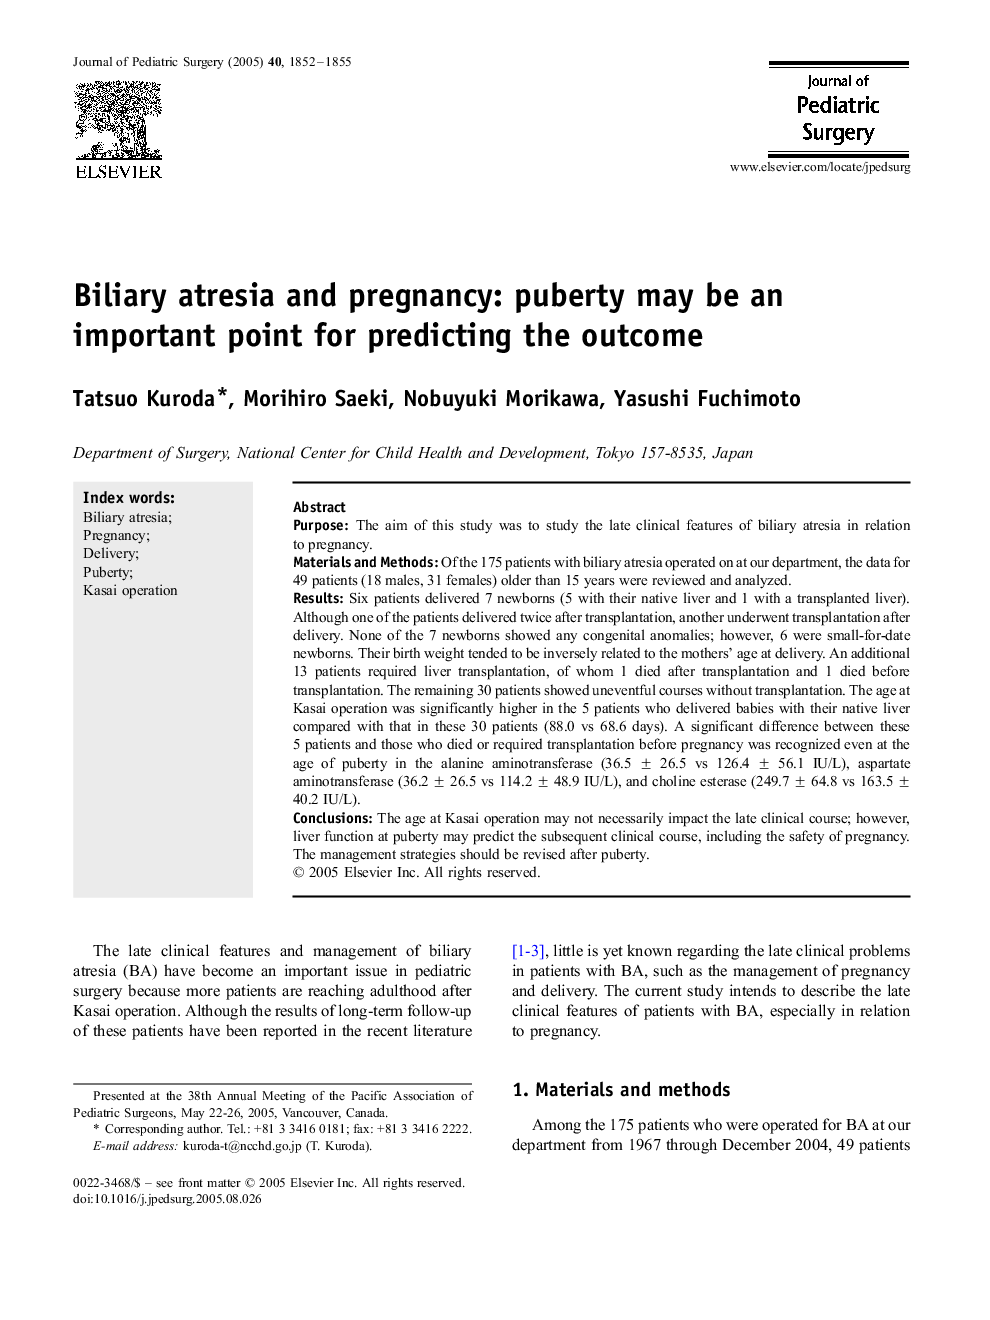 Biliary atresia and pregnancy: puberty may be an important point for predicting the outcome 